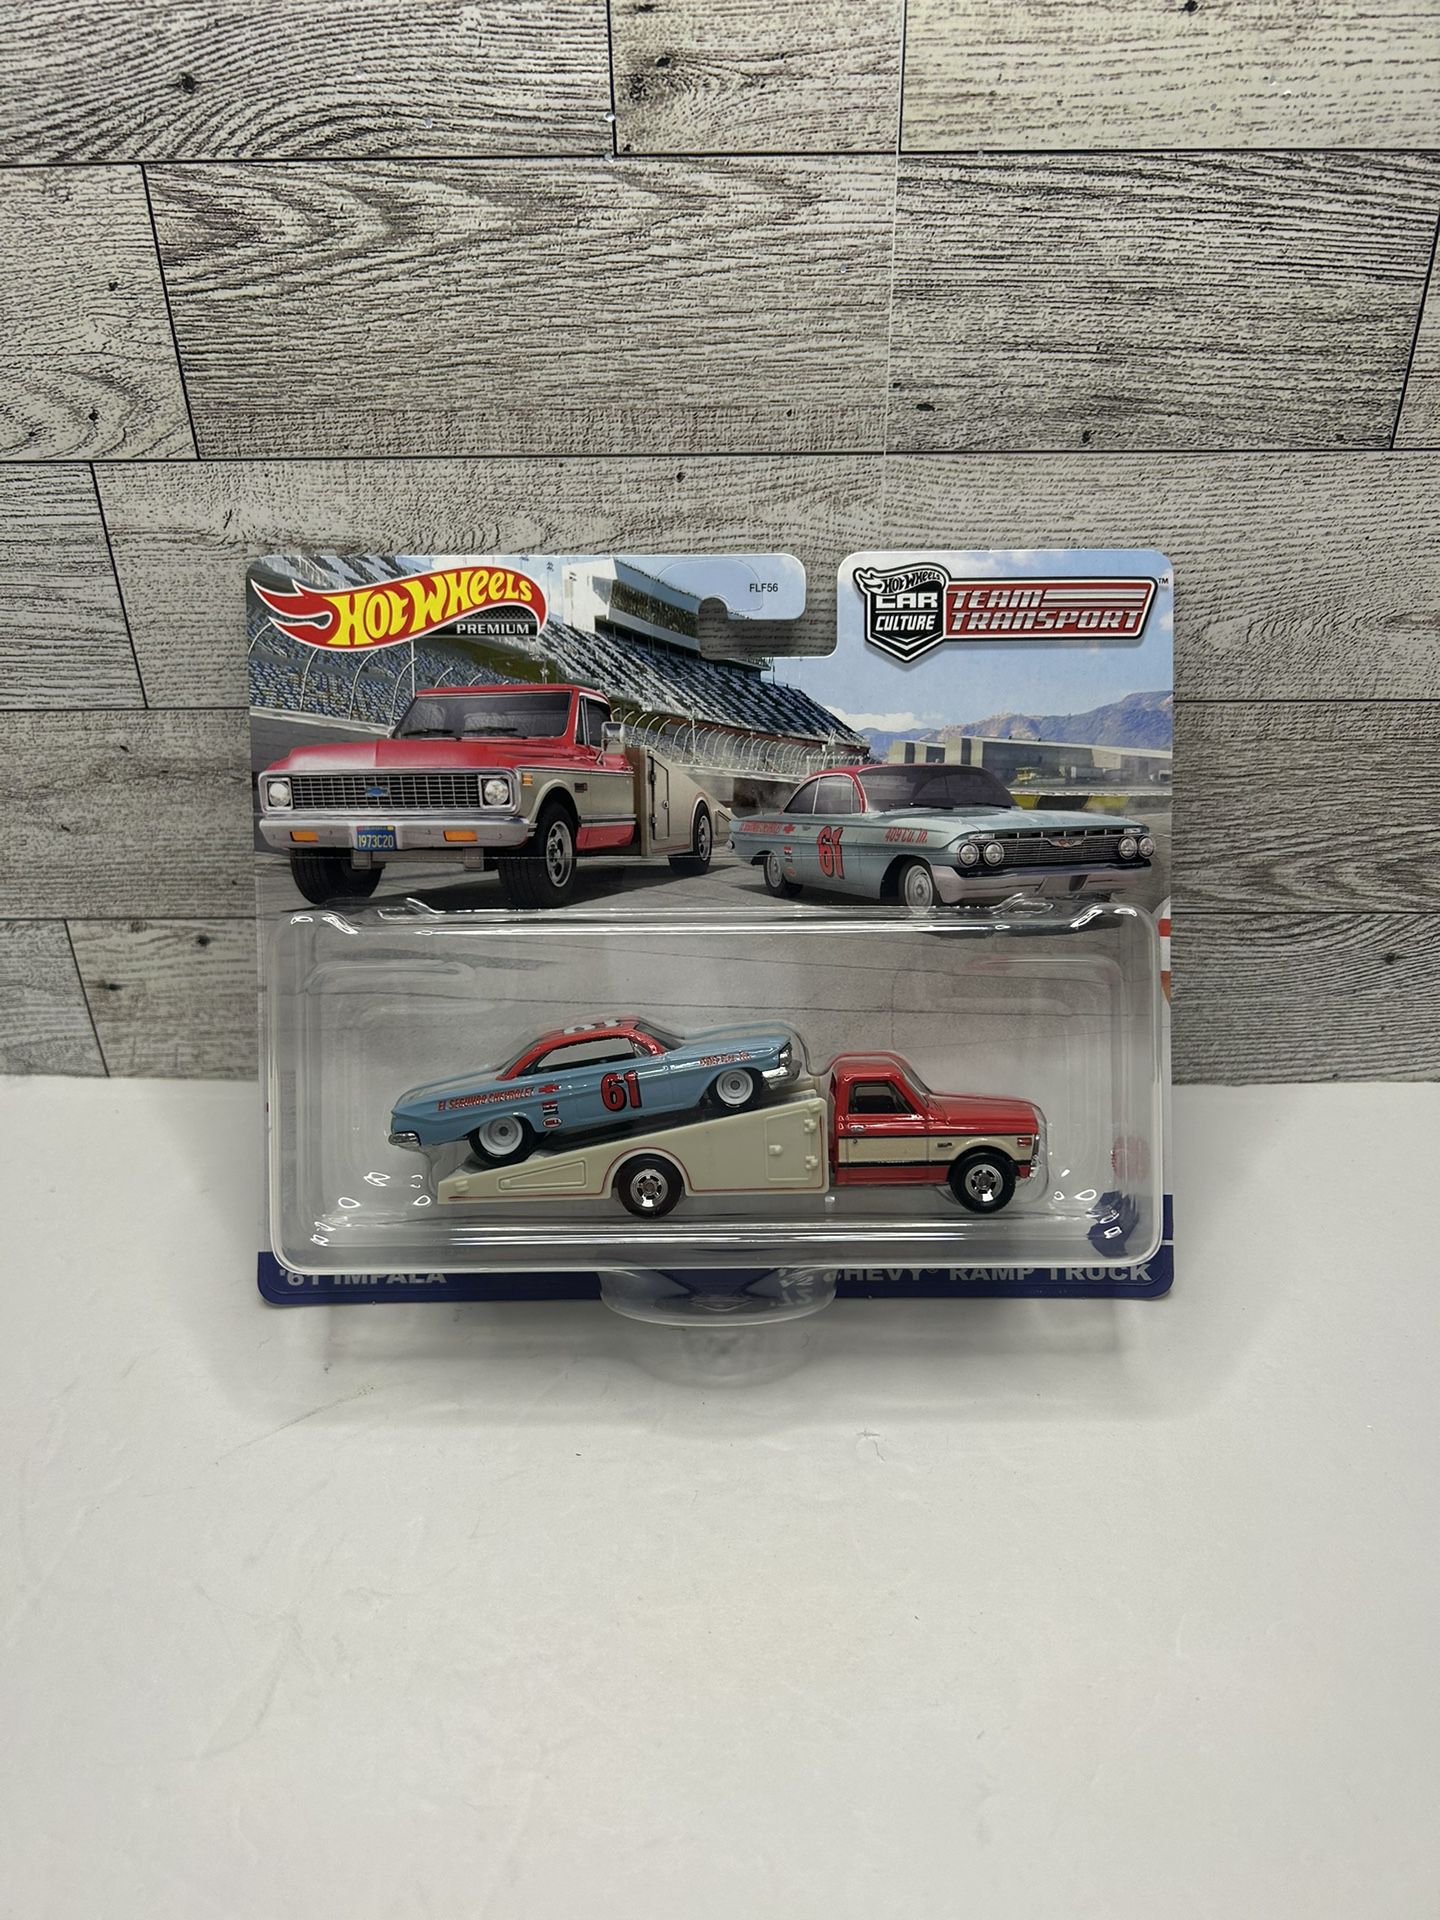 Hot Wheels Premium Car Culture Red / White ‘1961 Impala & ‘972 Chevy Ramp Team Transport truck • Die Cast Metal & plastic Parts • Made in Thailand  Me